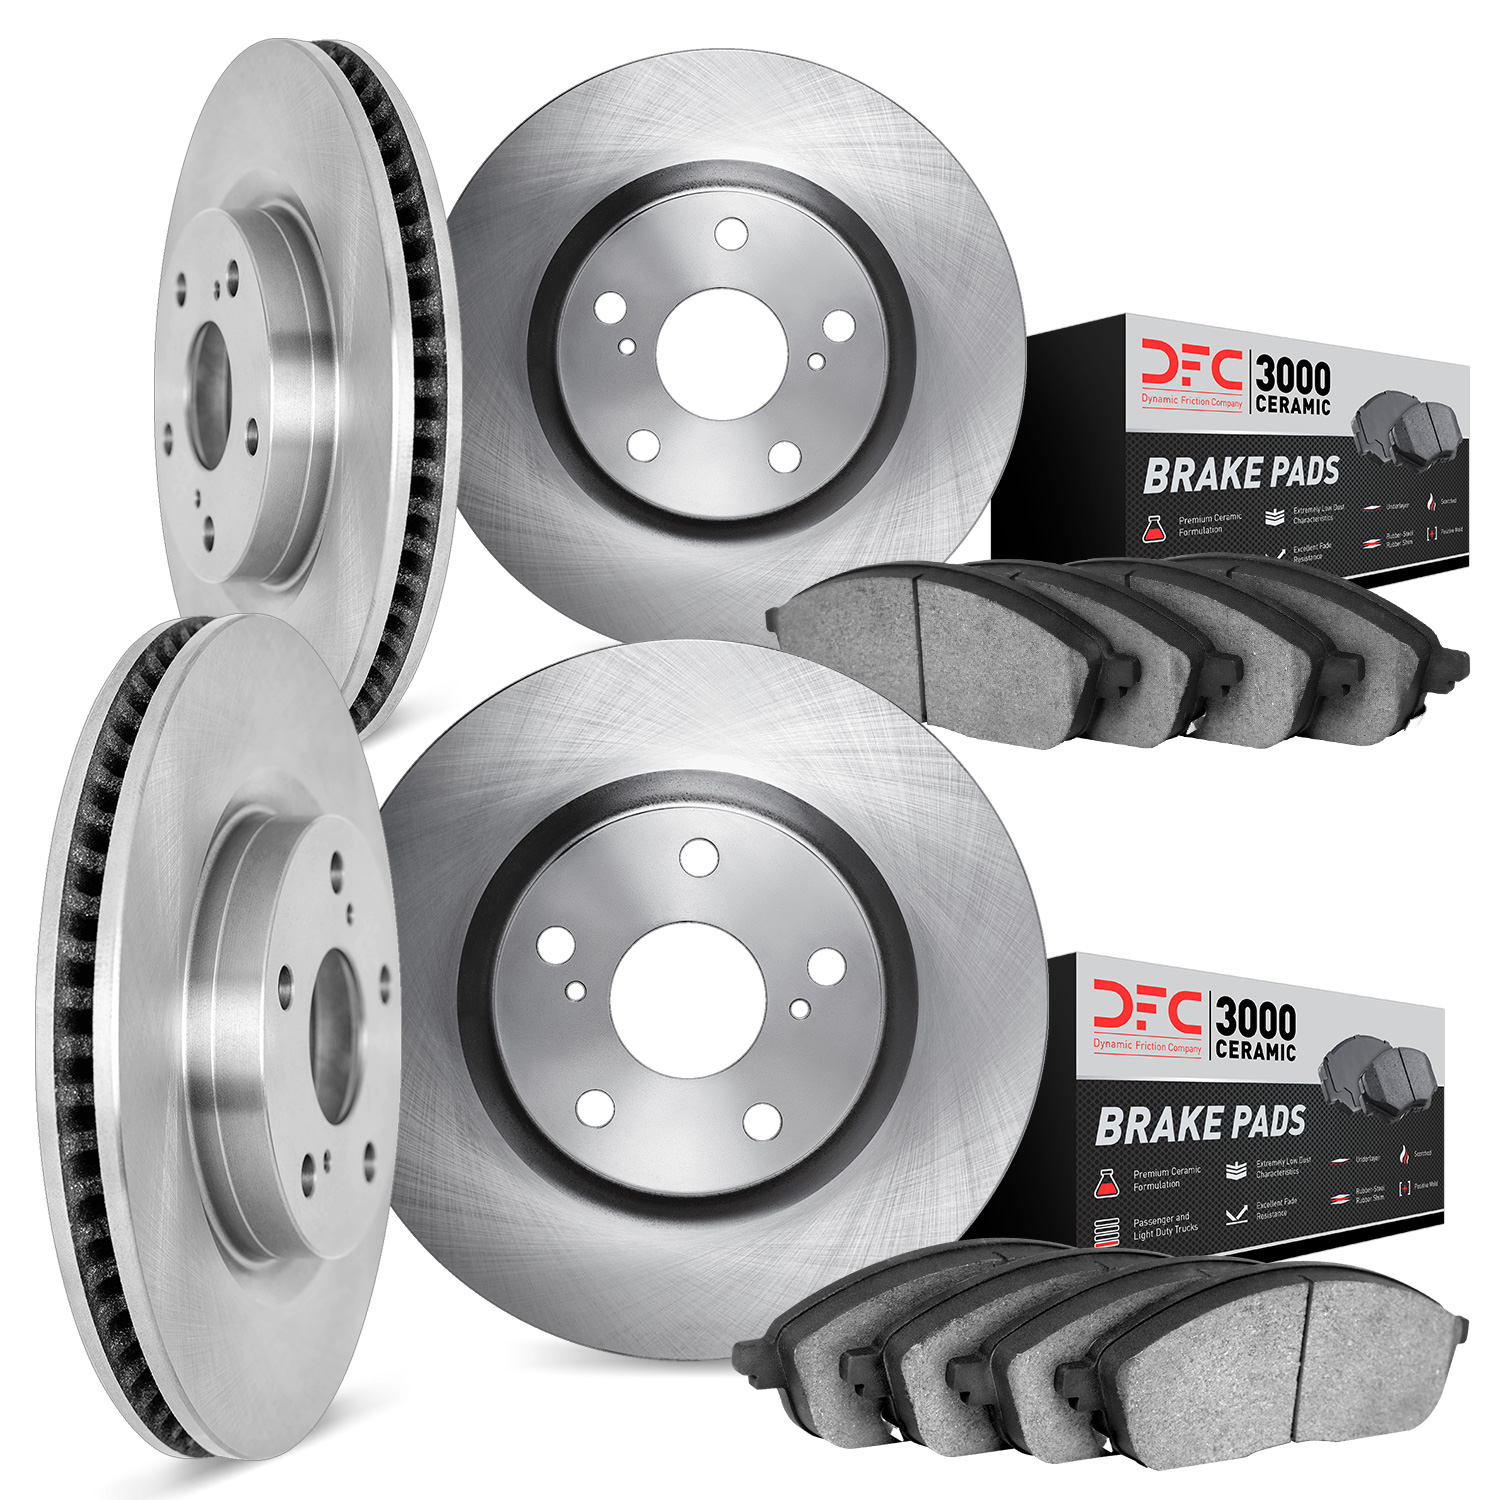 6304-75026 Brake Rotors with 3000-Series Ceramic Brake Pads Kit, Fits Select Lexus/Toyota/Scion, Position: Front and Rear